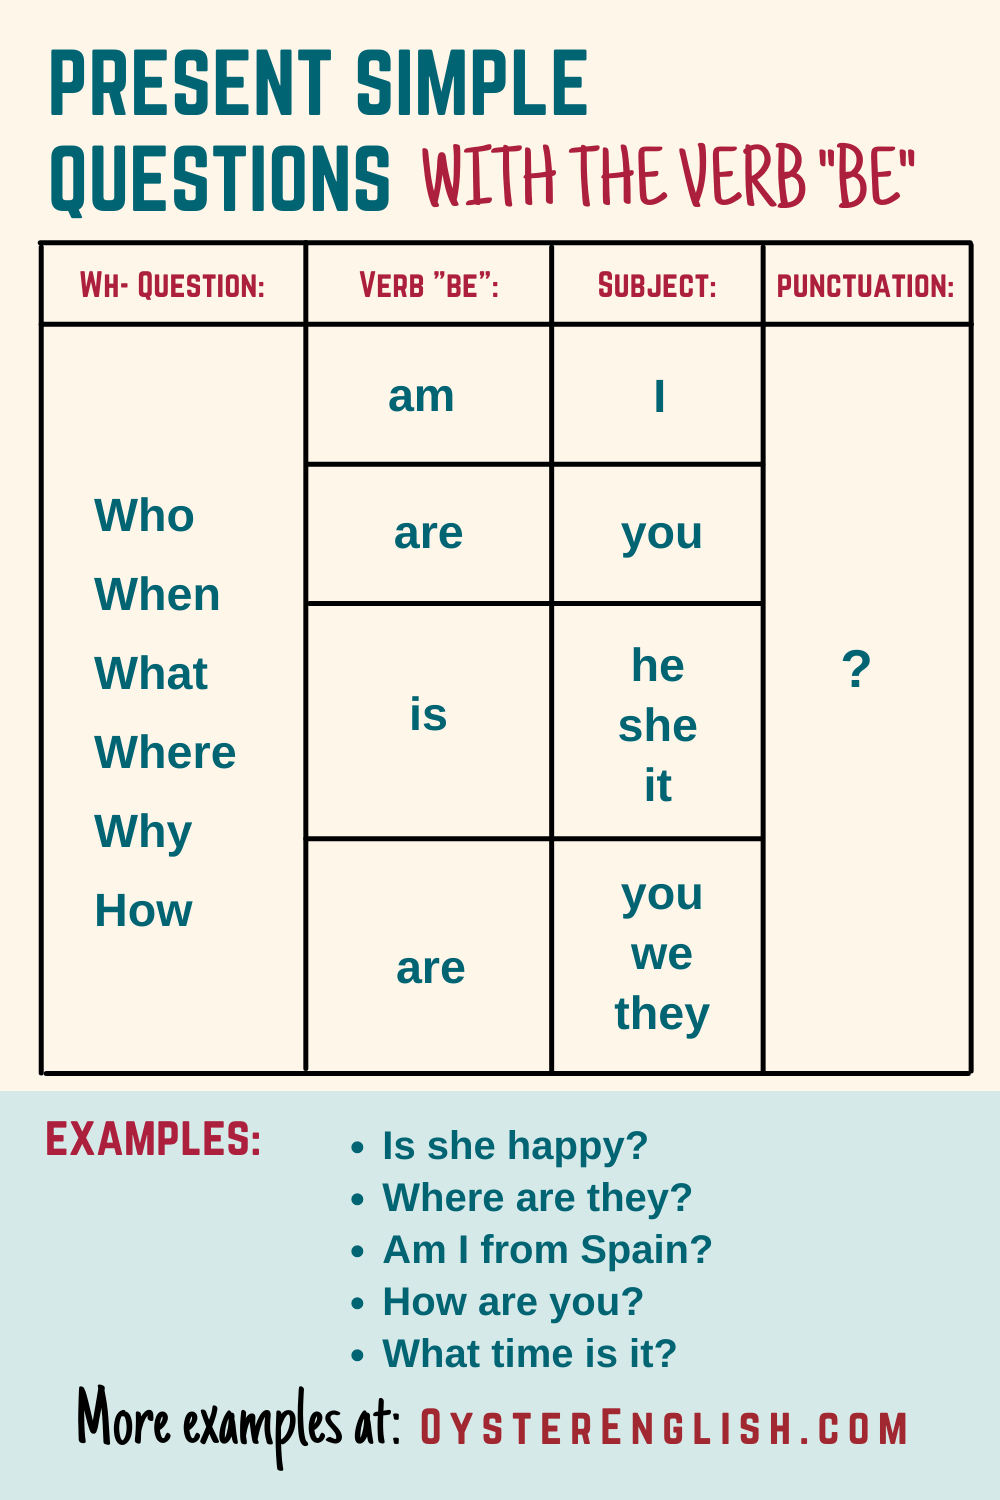 Chart showing how to form -wh questions in the present simple with the verb "be"